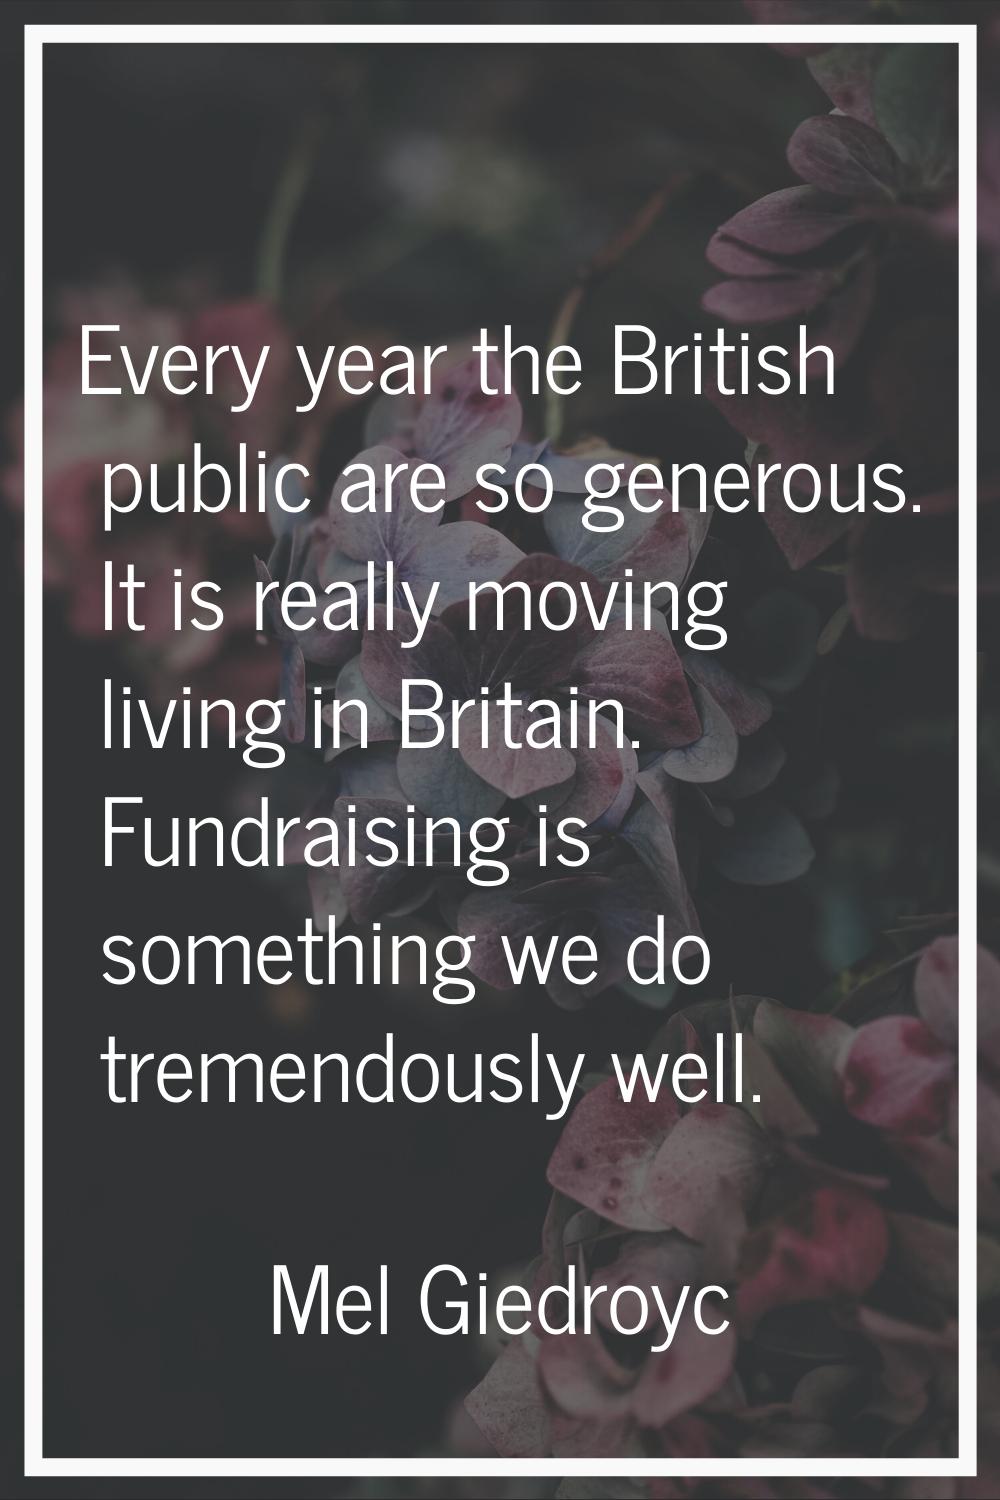 Every year the British public are so generous. It is really moving living in Britain. Fundraising i